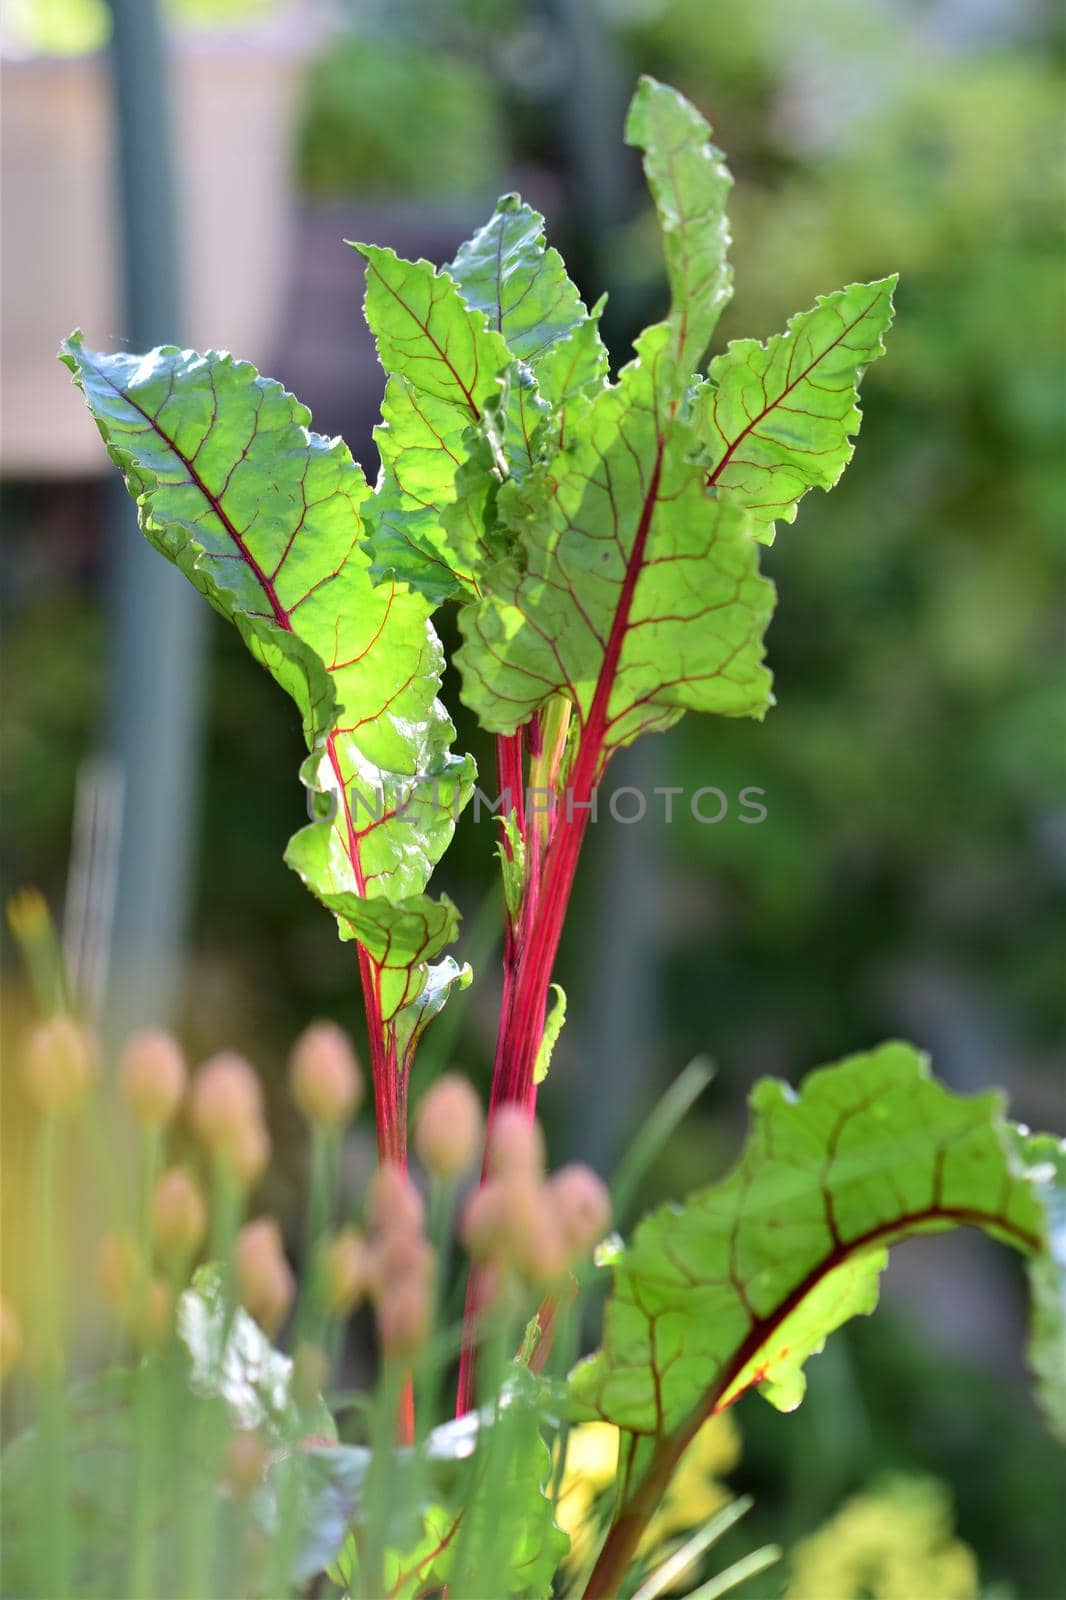 Red chard with chives in the foreground with different depth of field and a blurred background